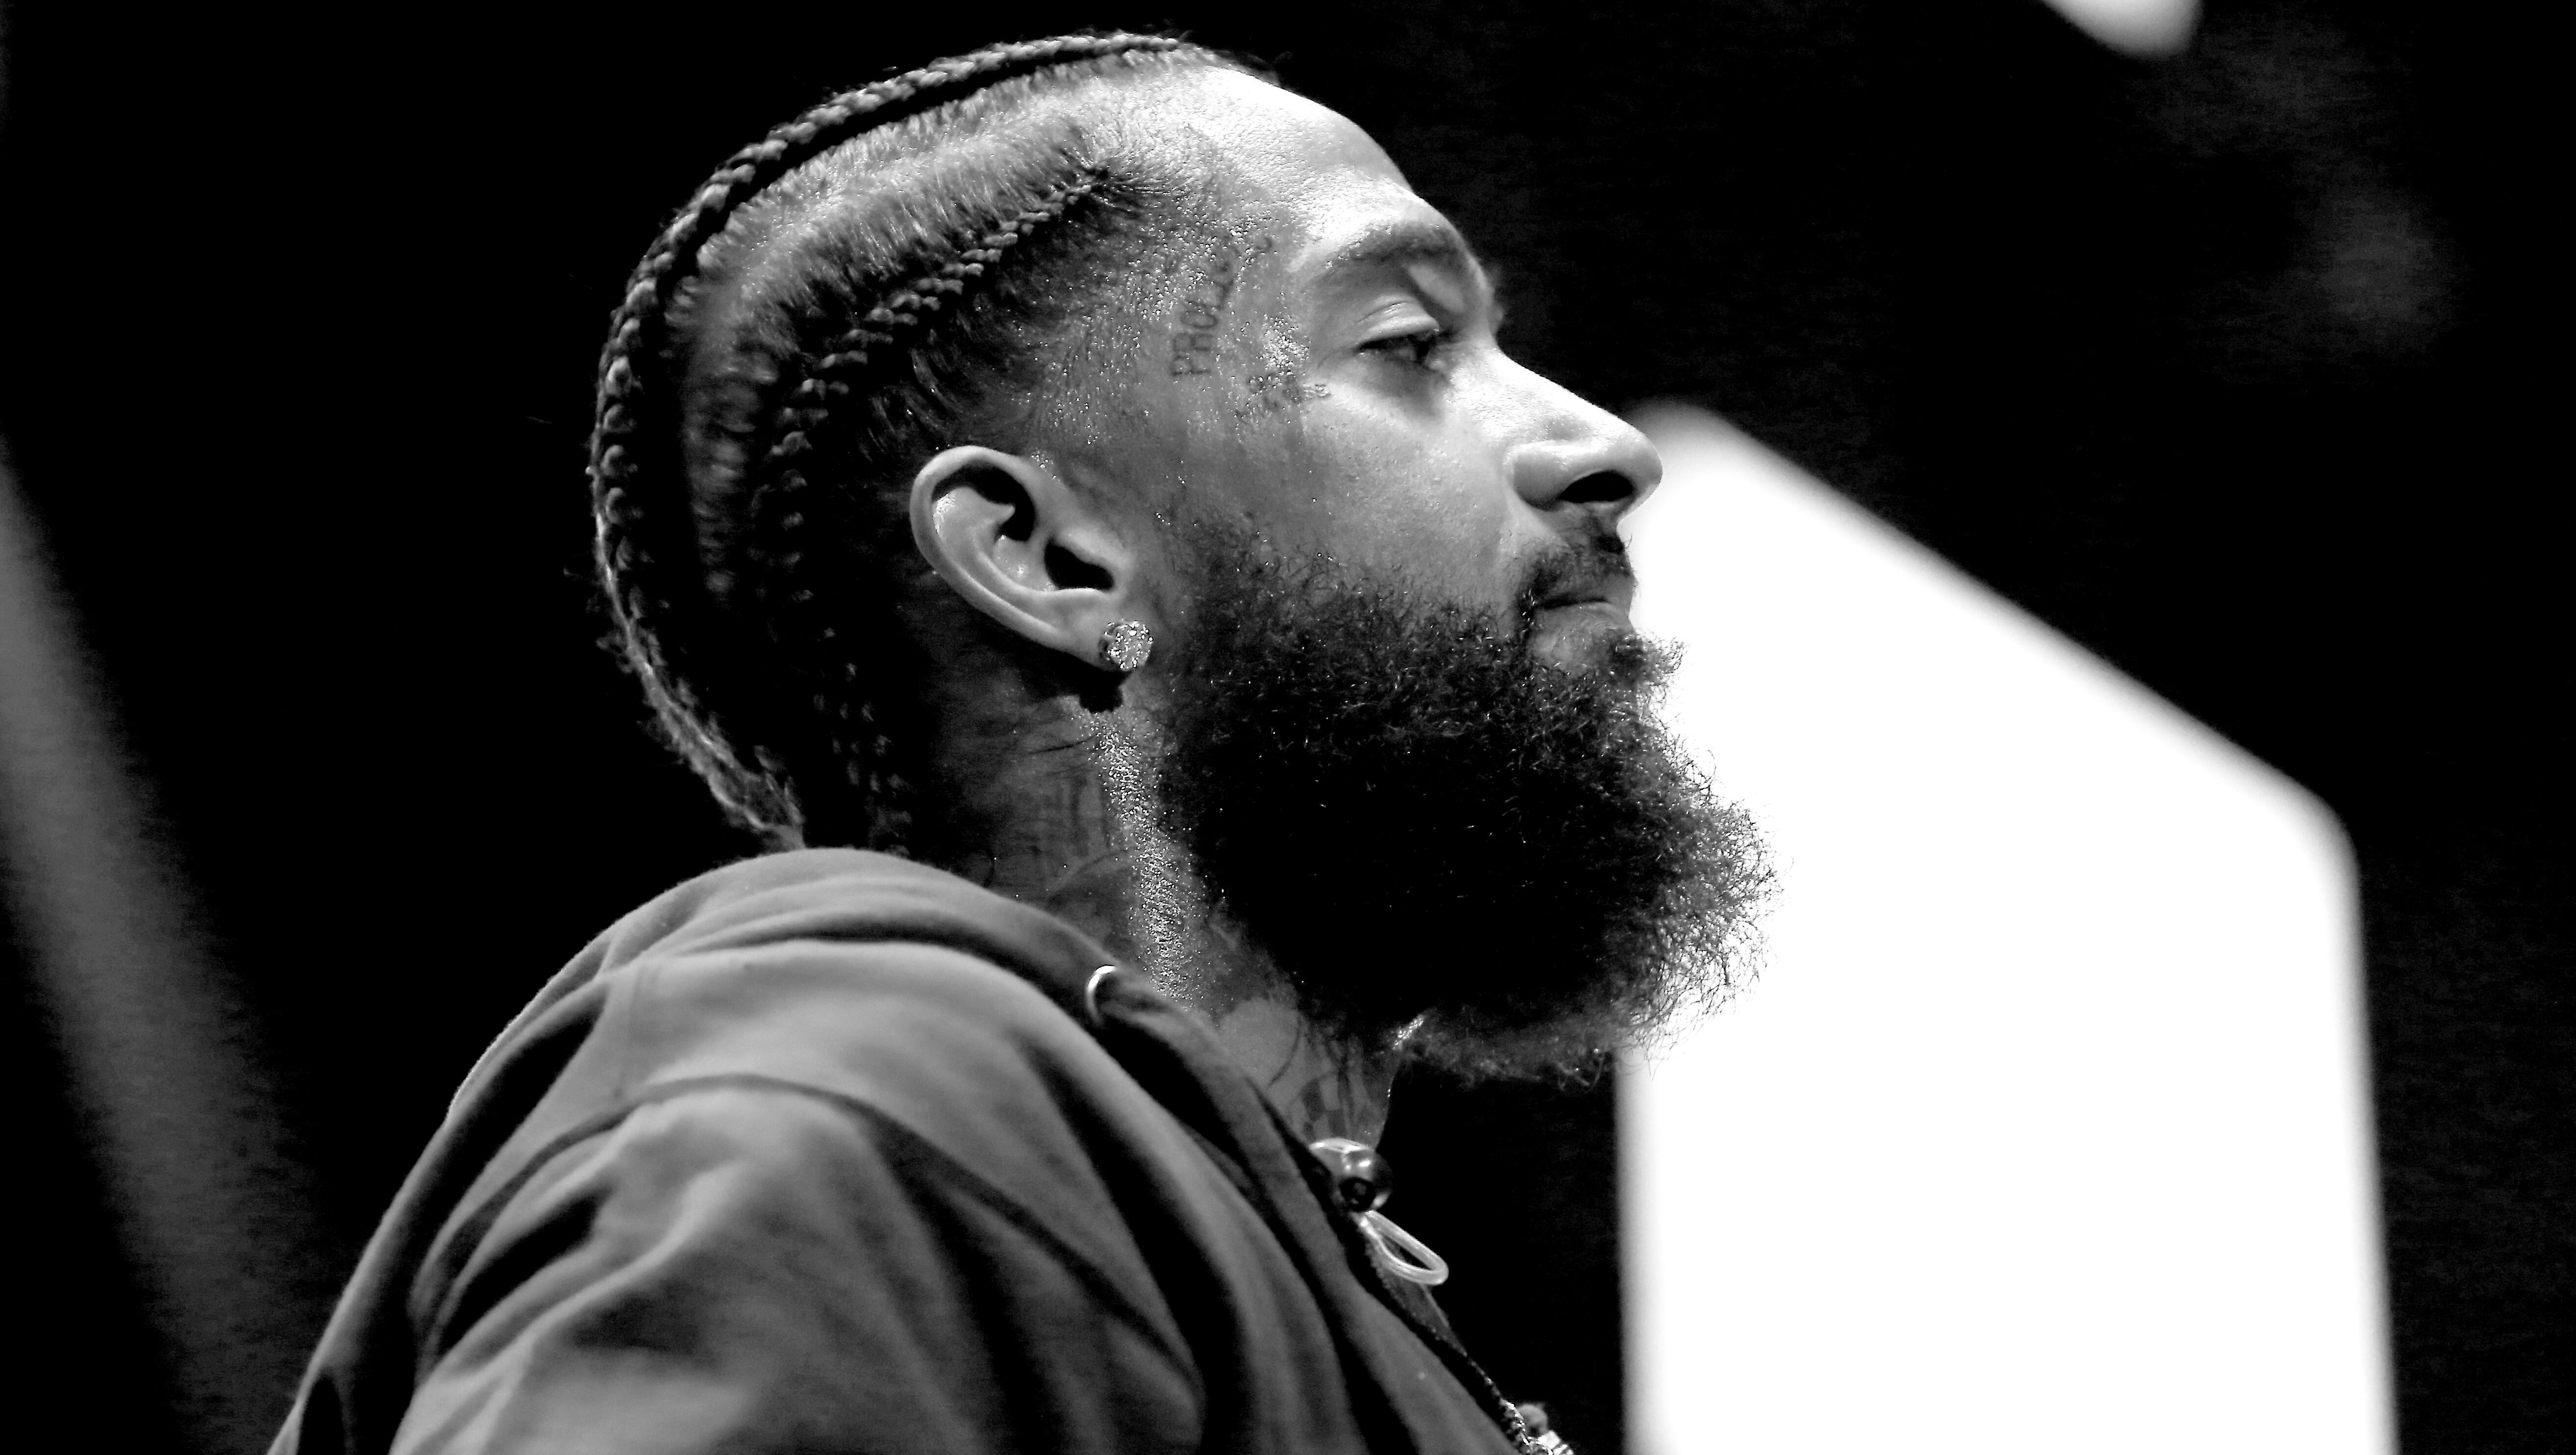 Watch A Documentary About Nipsey Hussle’s Cannabis Business